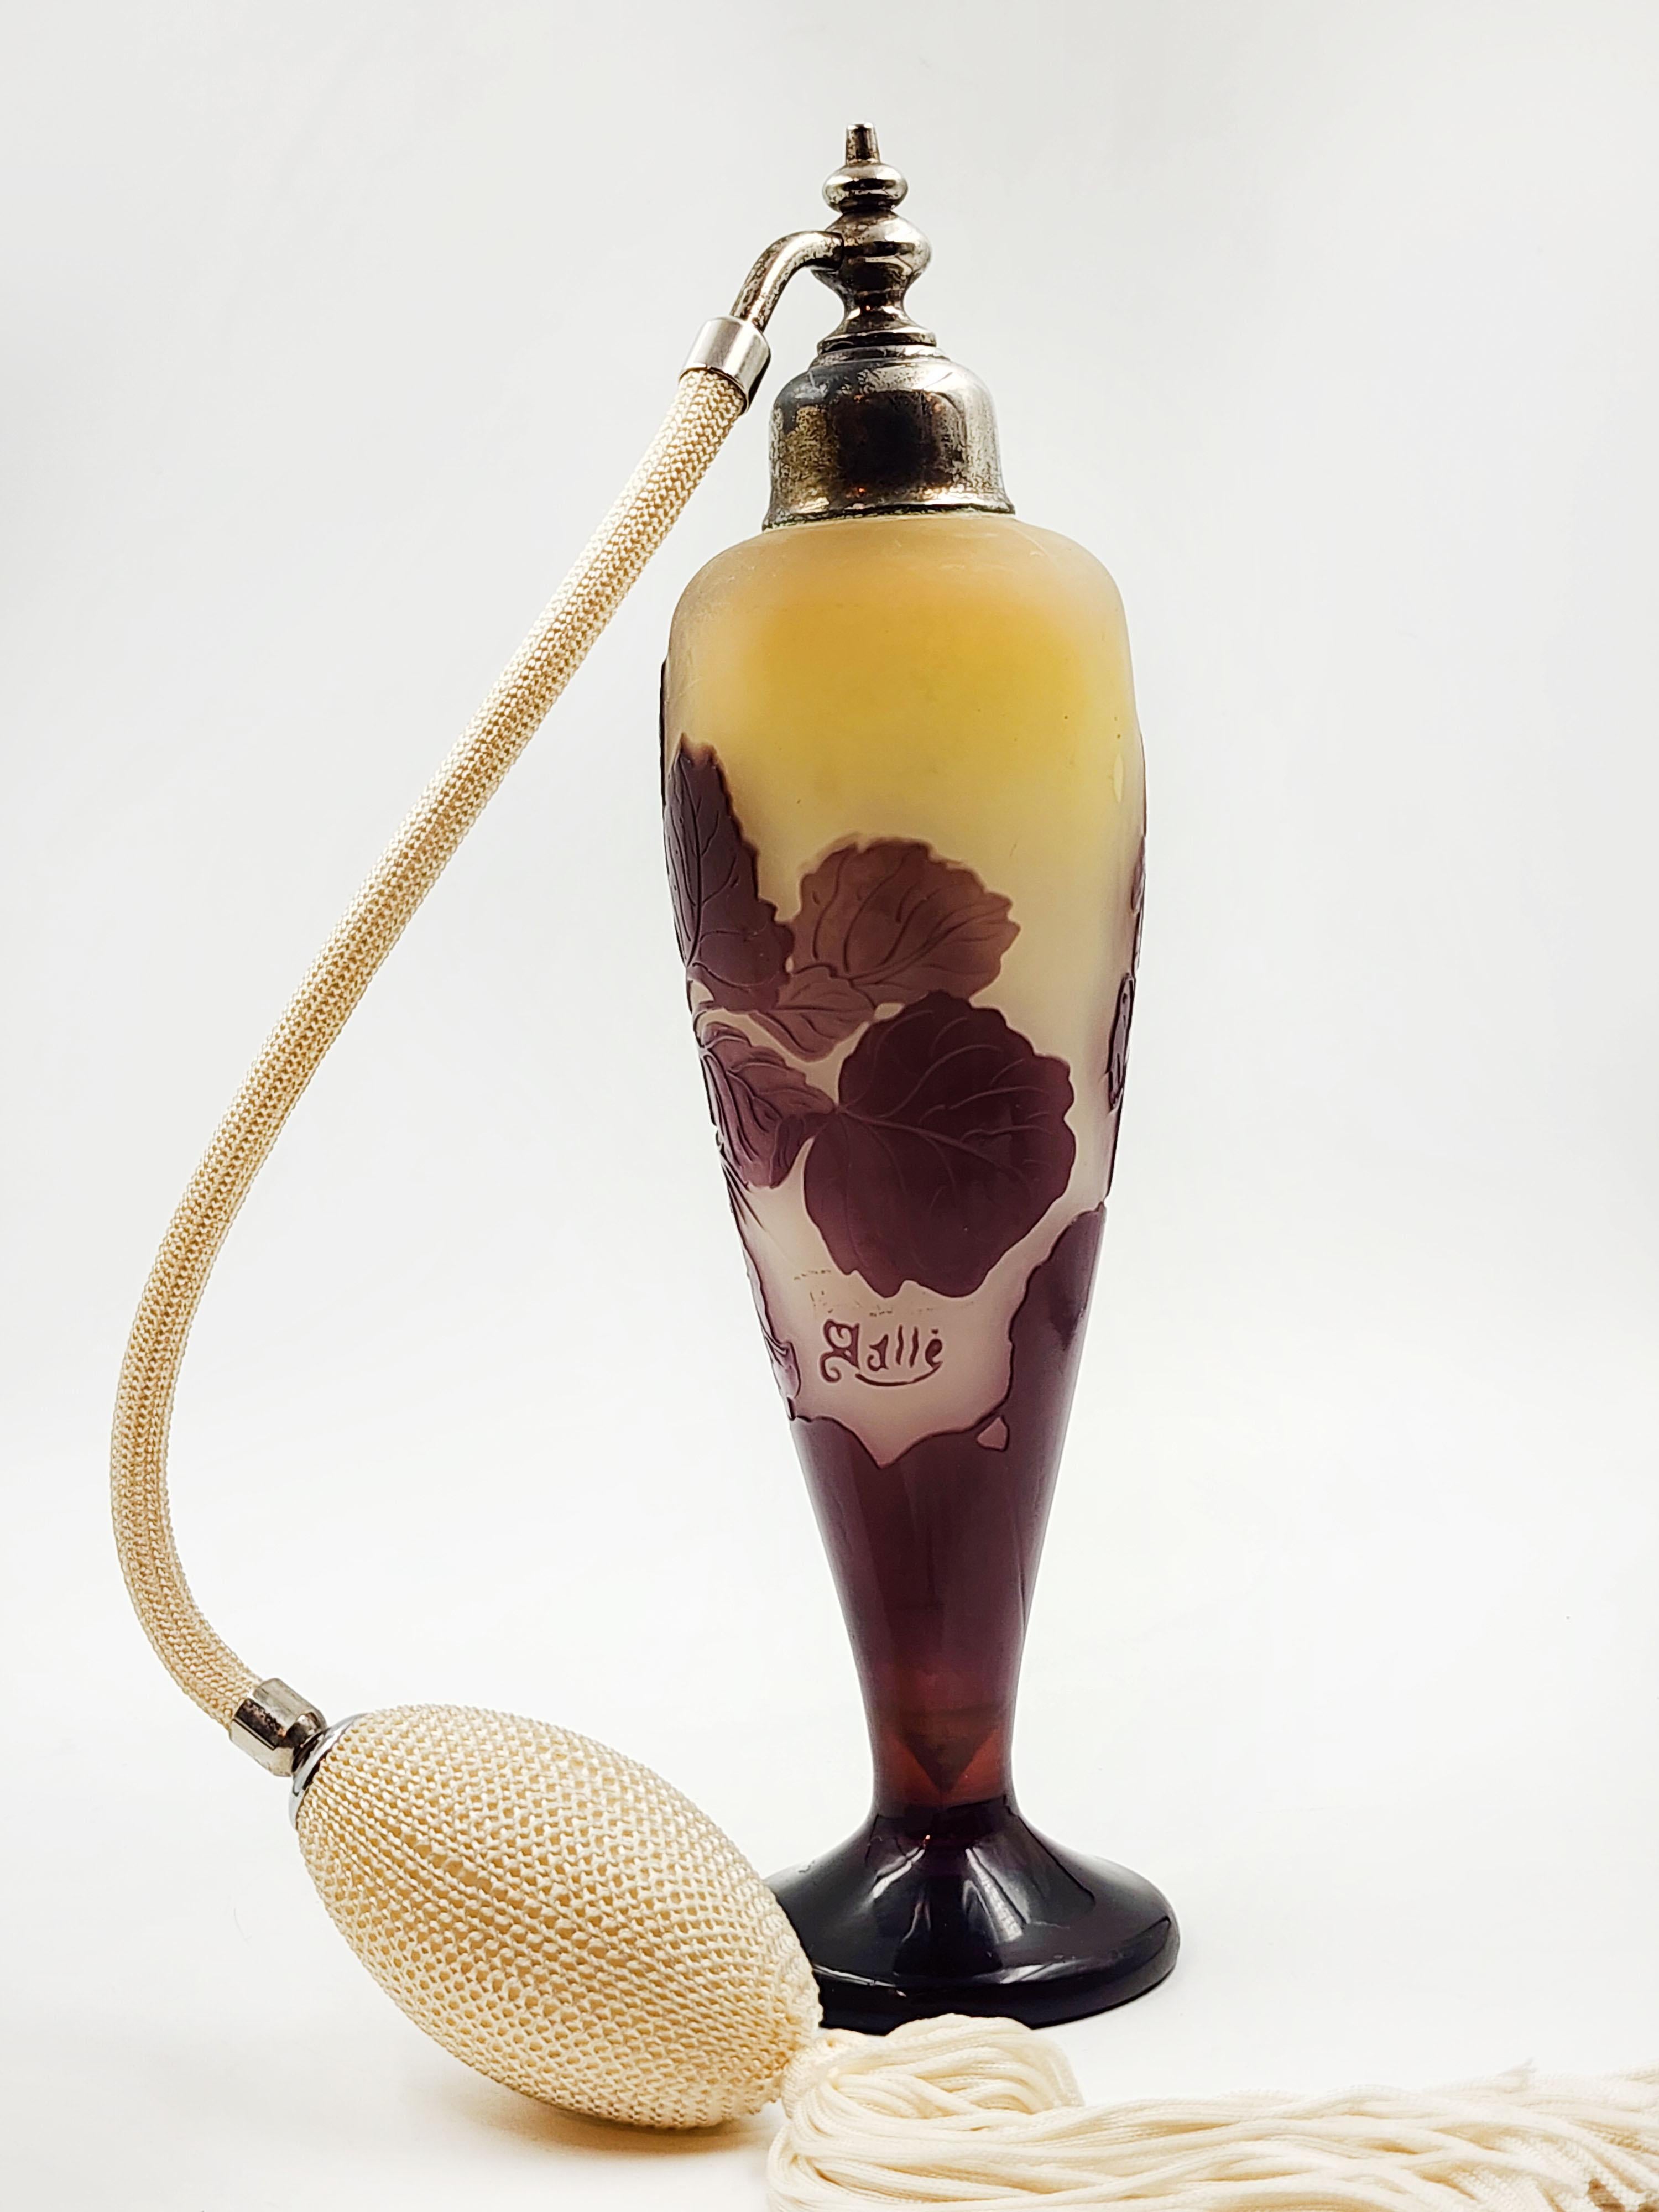 Emile Galle 20th Century Perfume Bottle For Sale 1